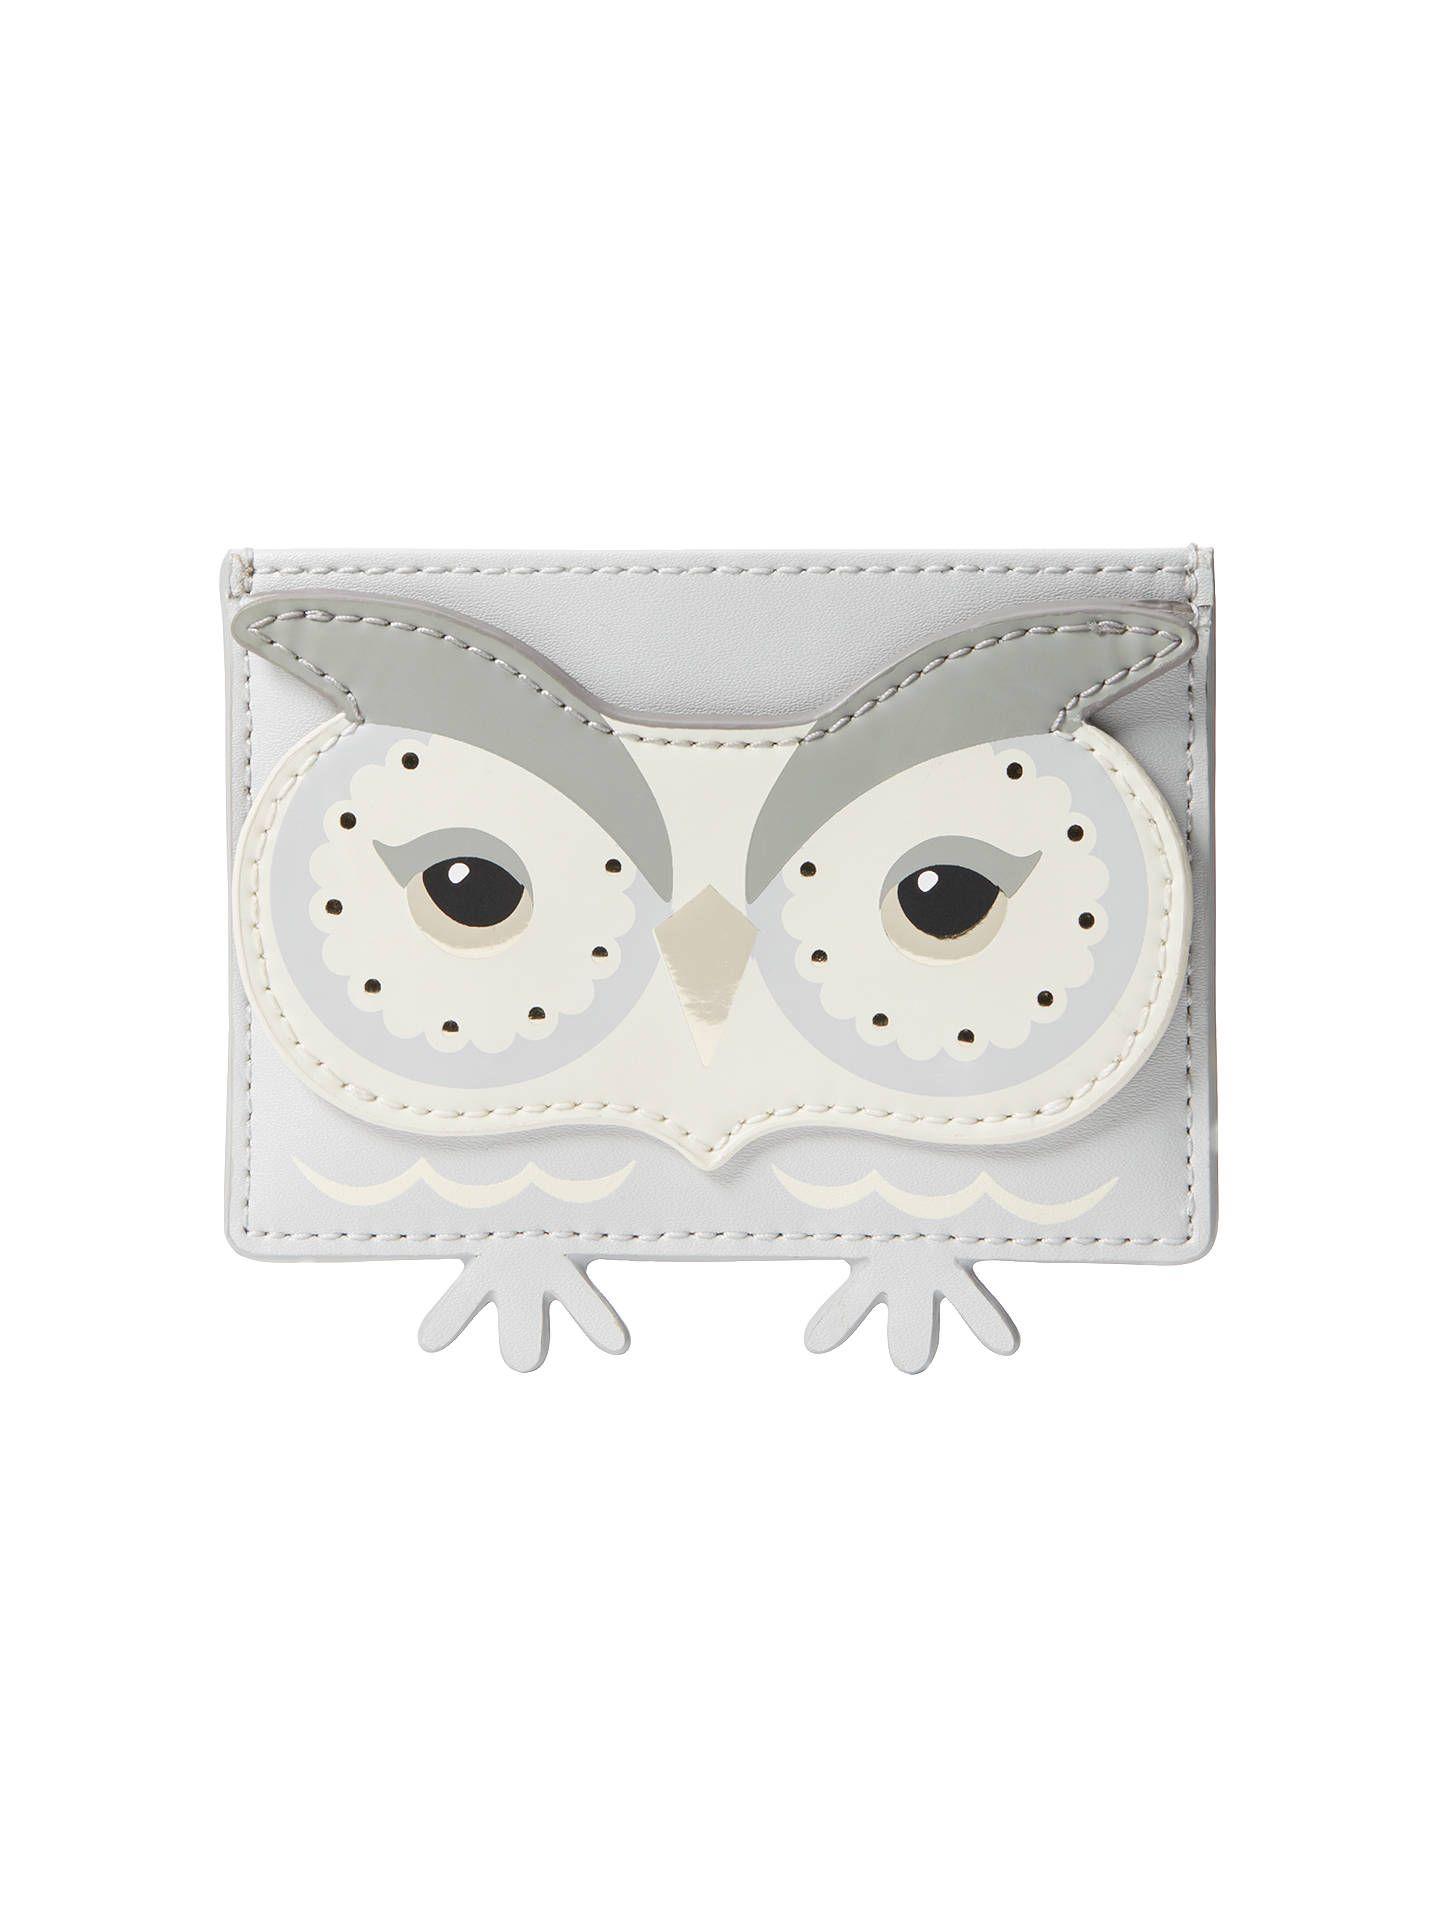 Spade with White Star Logo - kate spade new york Star Bright Owl Leather Card Holder, Multi at